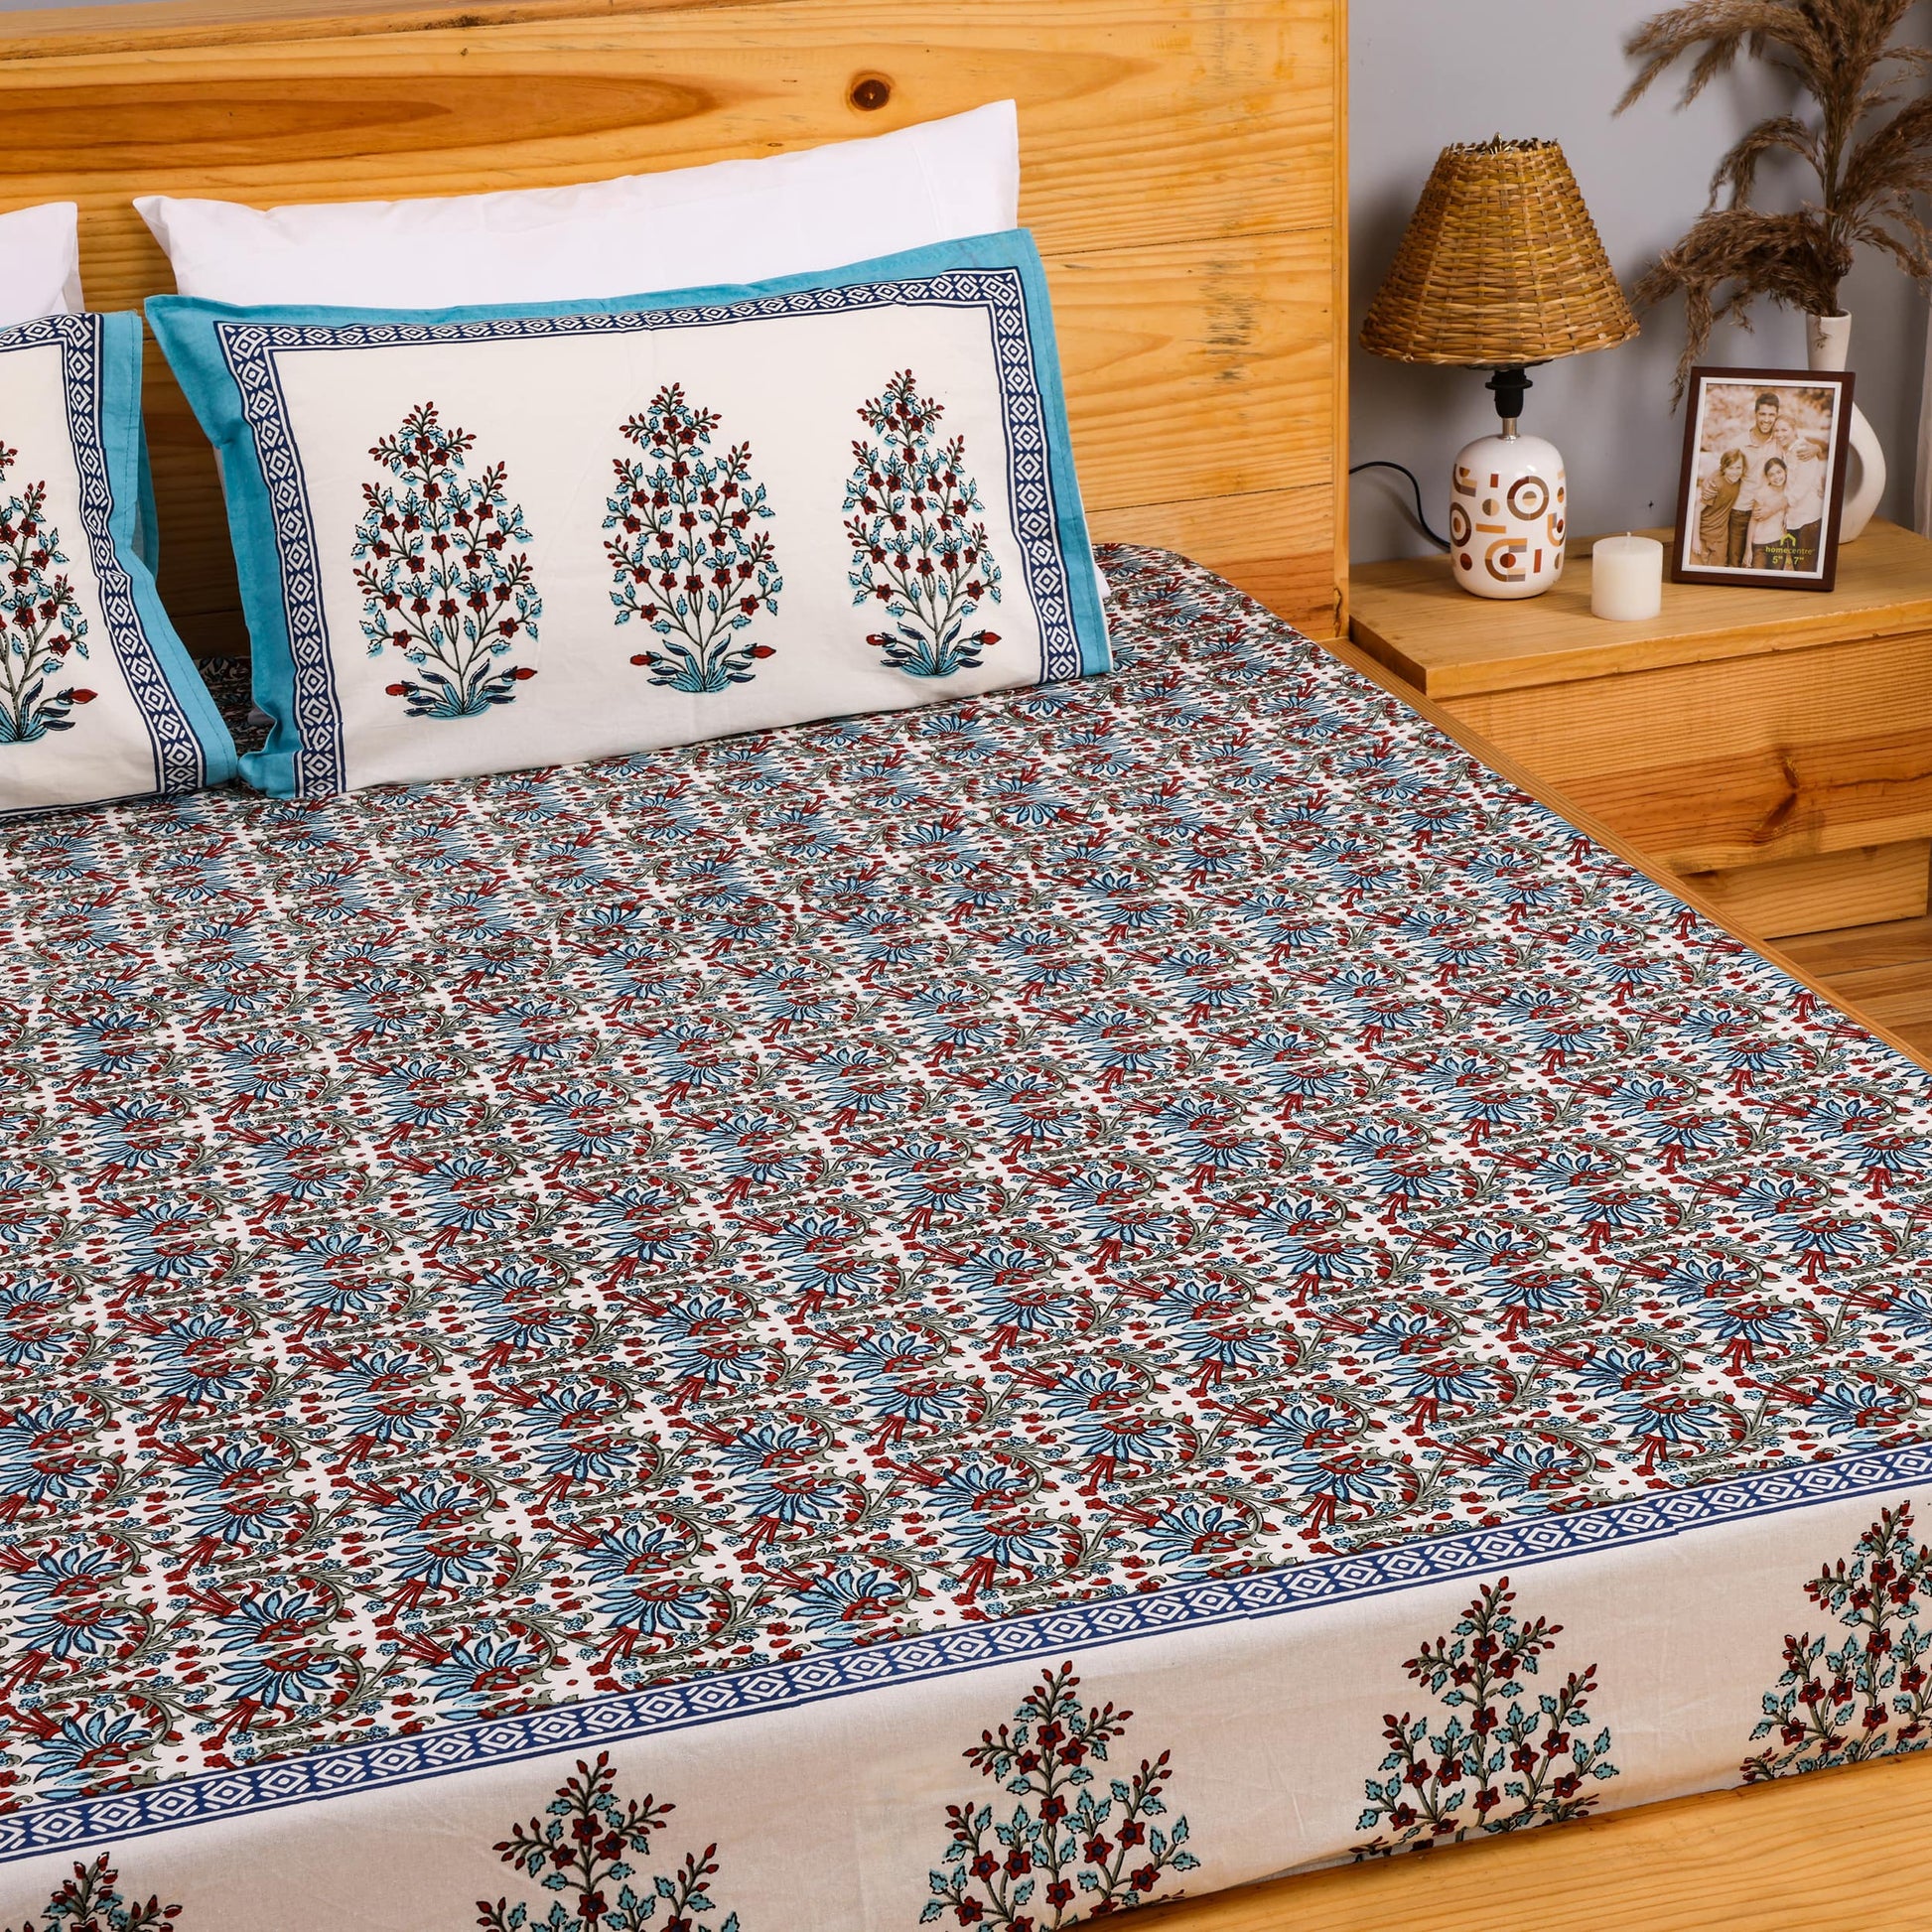 Pure Cotton Block Print Jaipuri Bedsheet - Super King Size 108*108 inches - Blue Floral Jaal